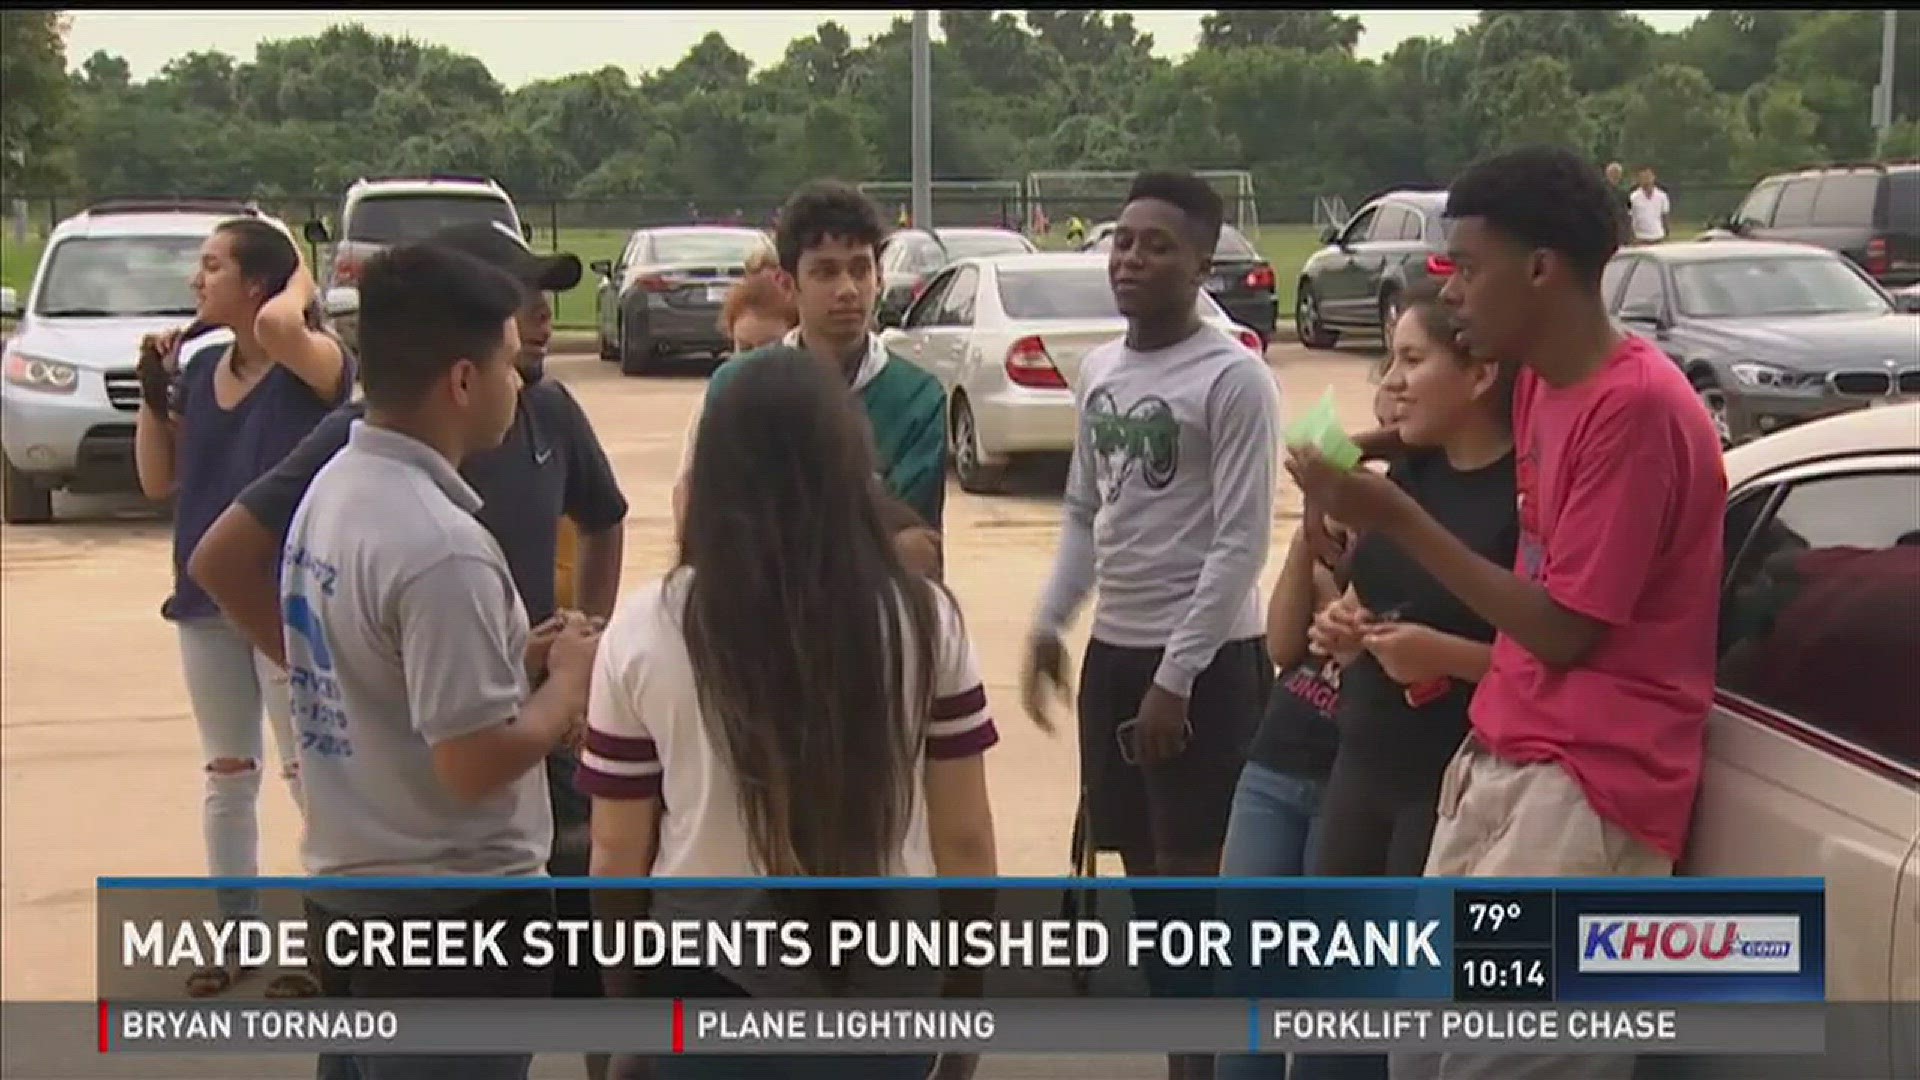 Seniors at Mayde Creek High School in Katy, Texas are being punished for a prank that got out of control on Thursday. Some of the students have been told they will not walk at their graduation.